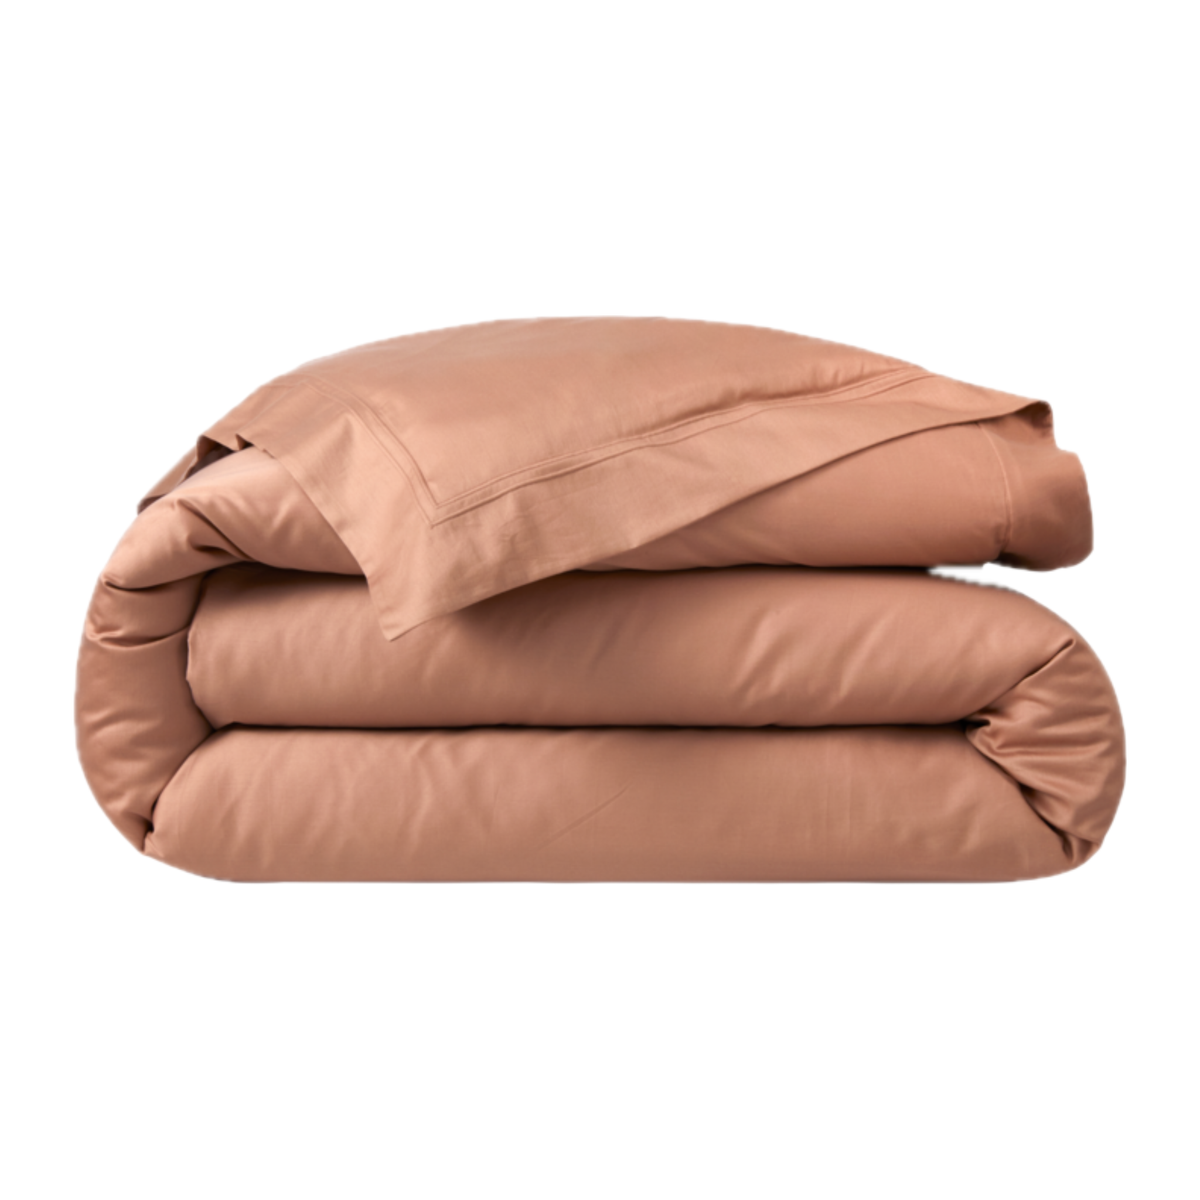 Folded Duvet Cover of Yves Delorme Triomphe Bedding in Sienna Color